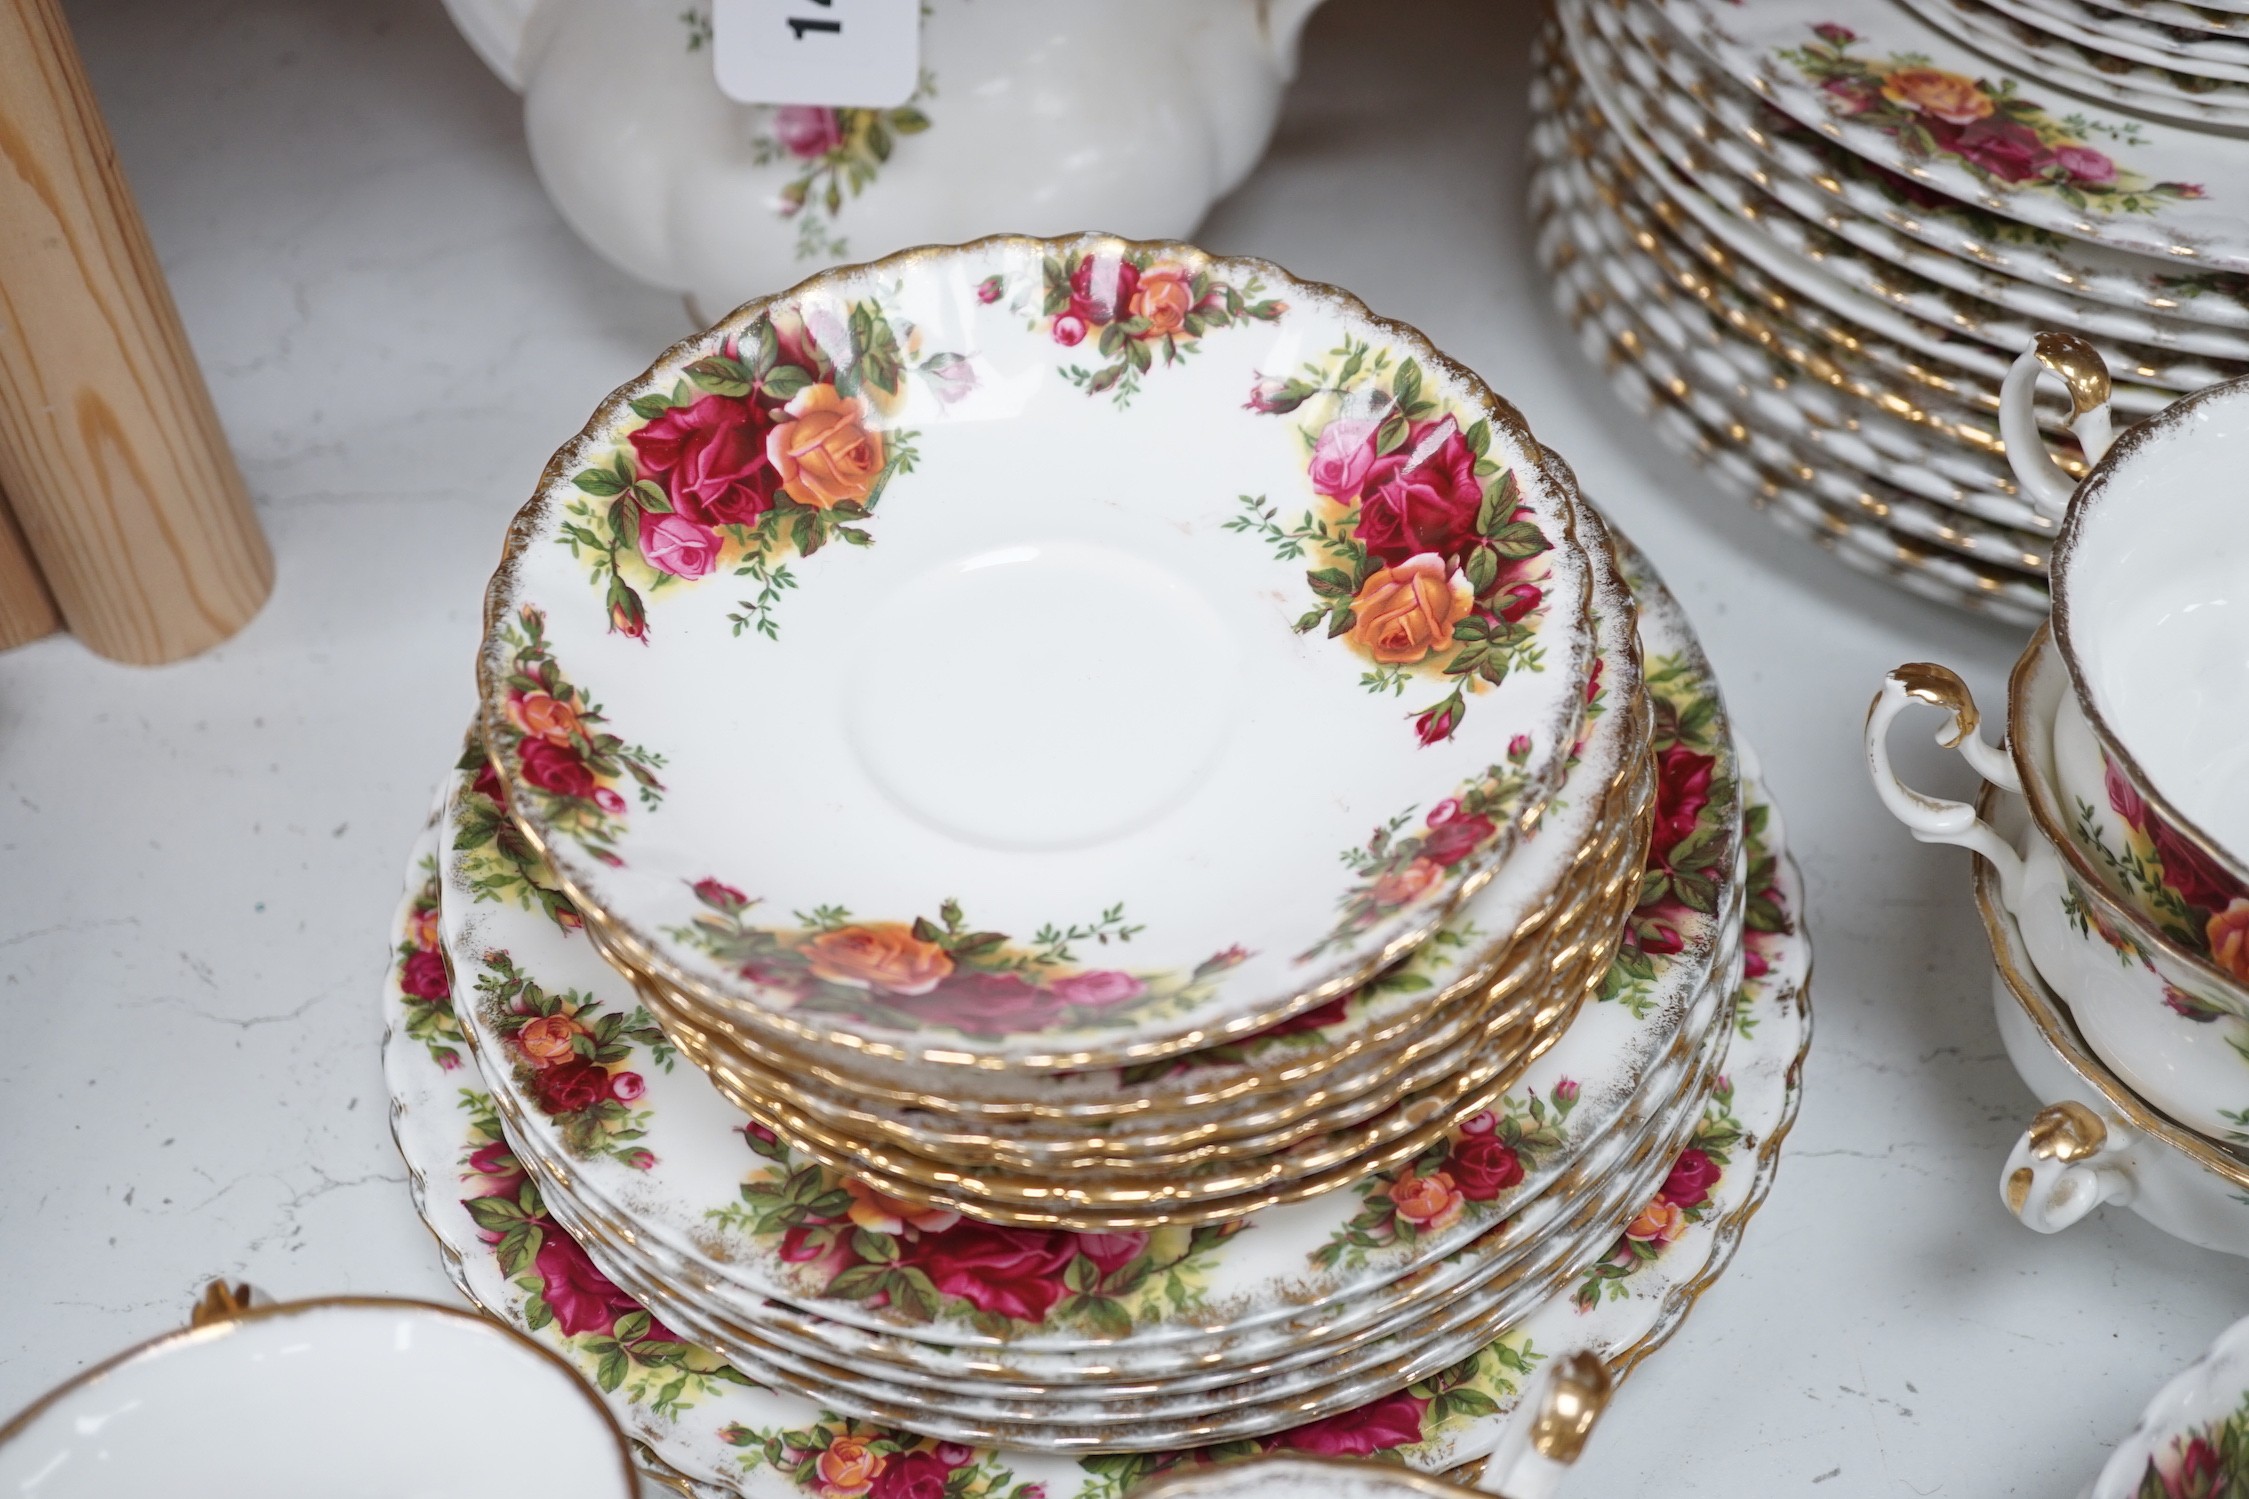 Royal Albert Old Country Roses teaset, factory seconds